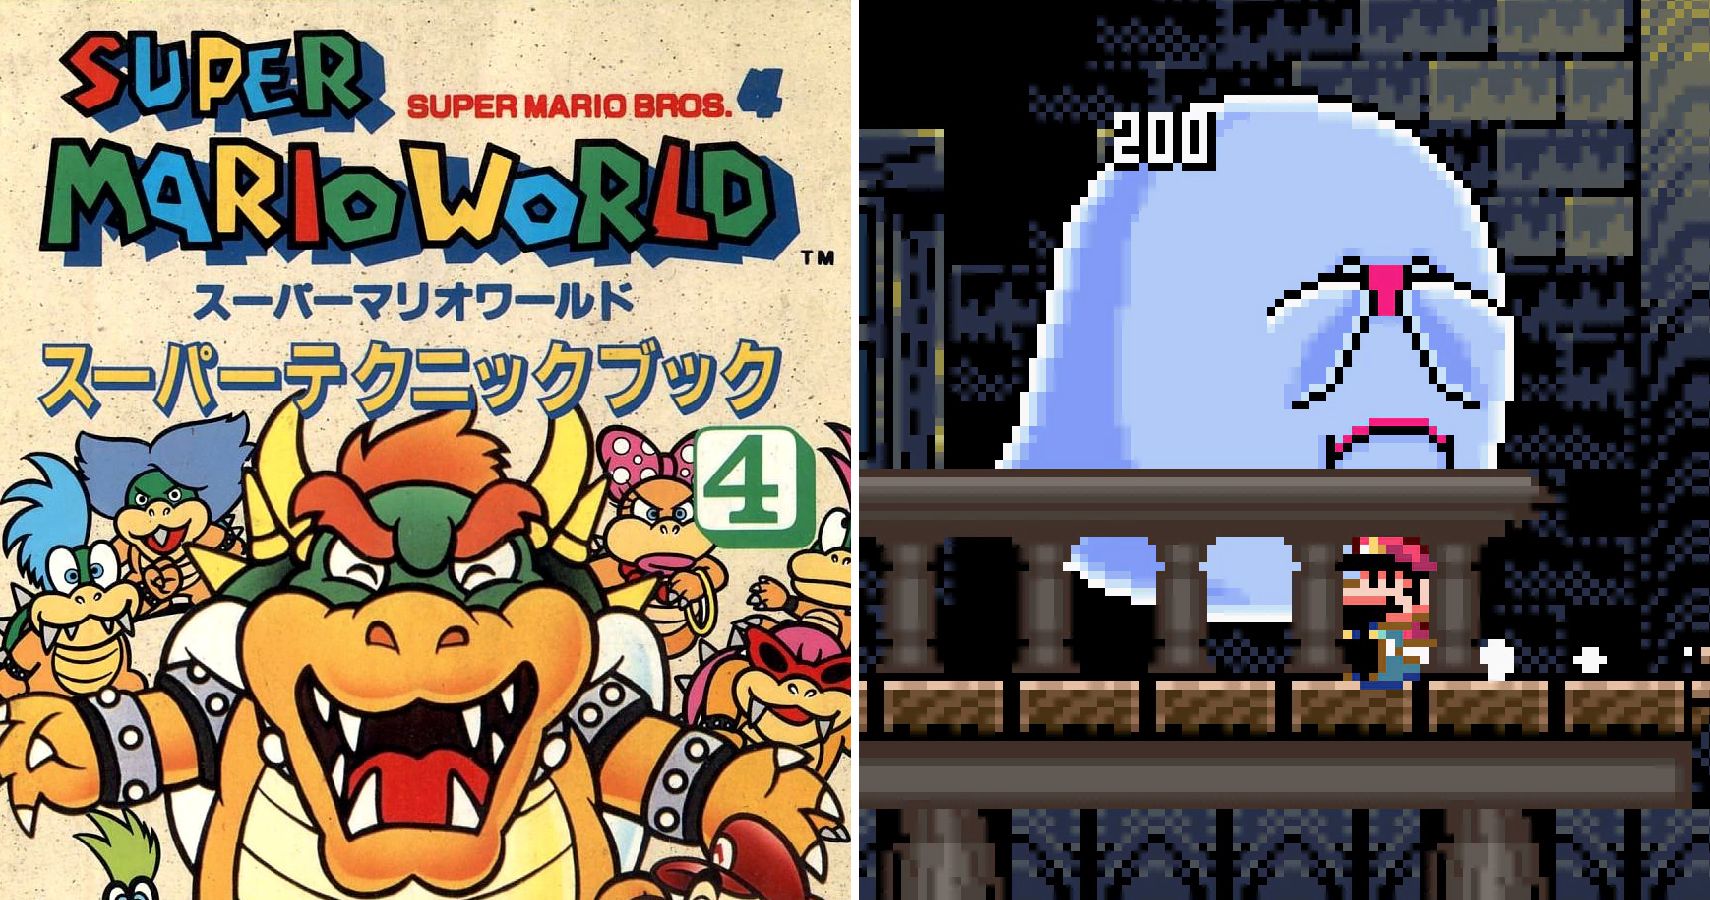 Super Mario World: Crazy Things You Had No Idea About